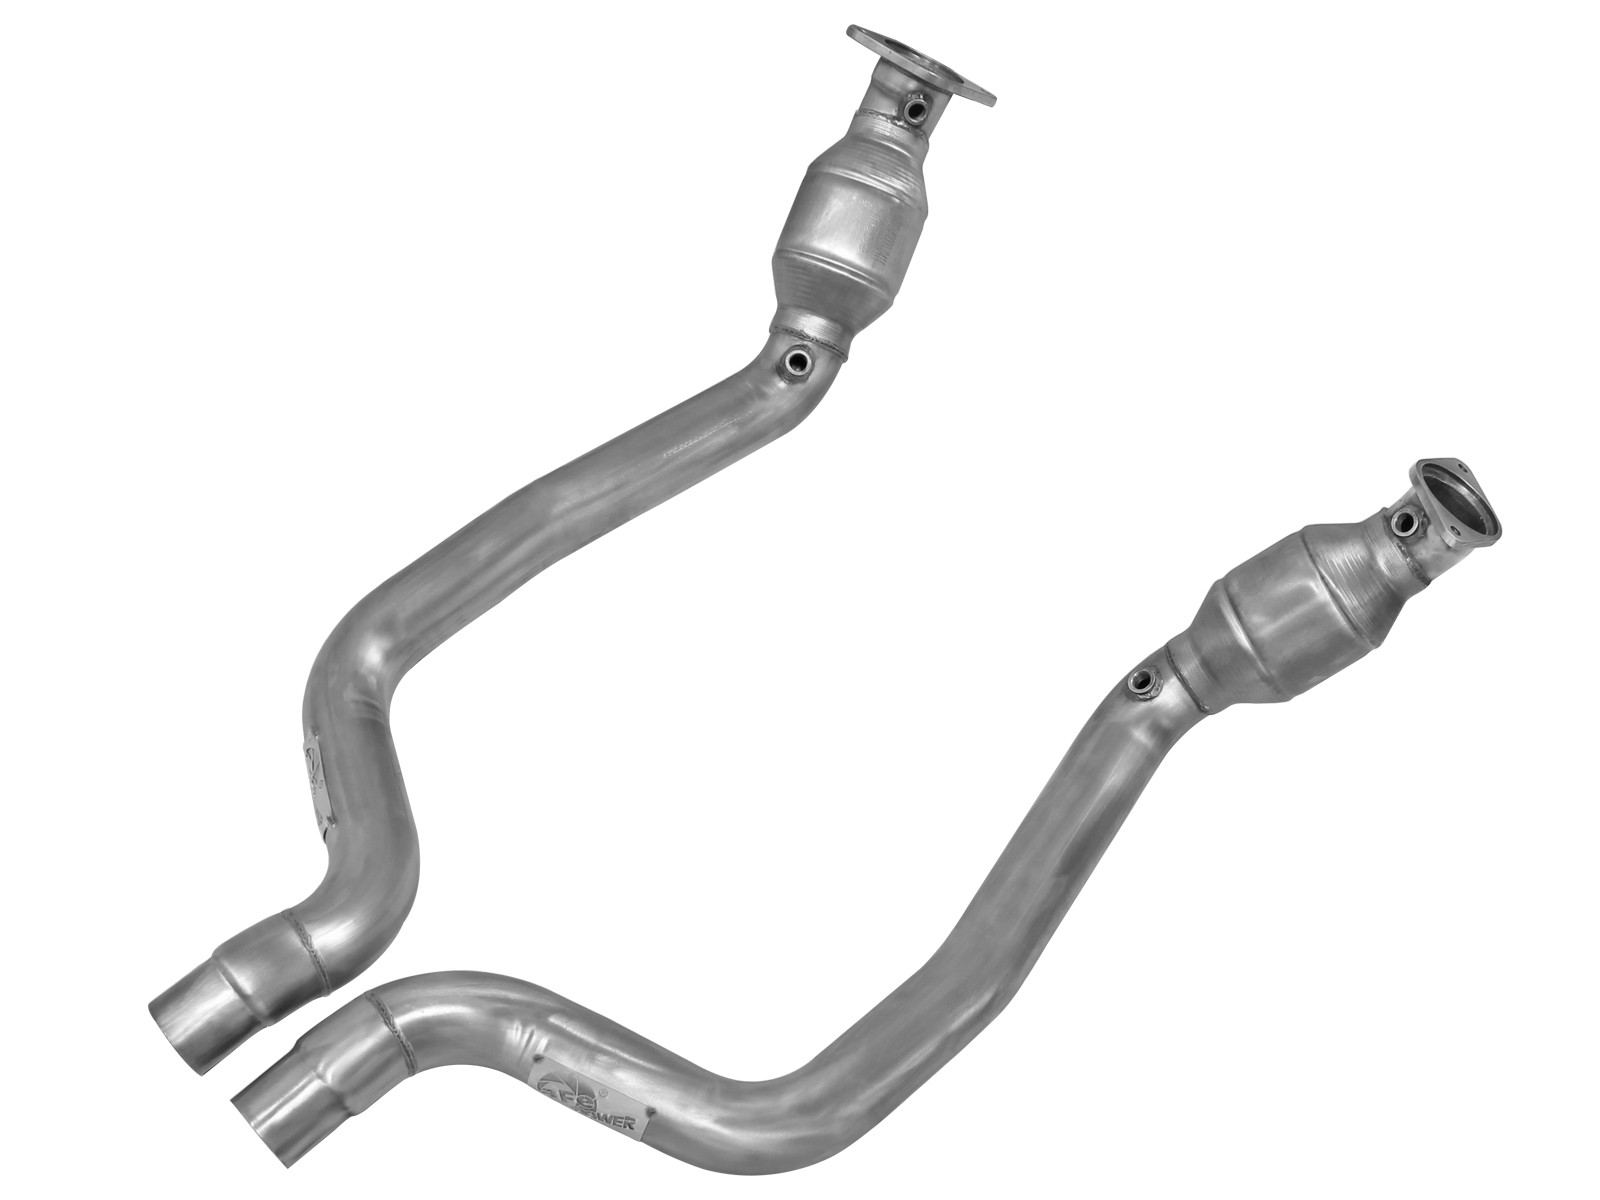 2011-2014 Dodge Challenger SRT8 6.4L V8 aFe Power Twisted Steel Street Series Connection Pipes 3" Stainless Exhaust System